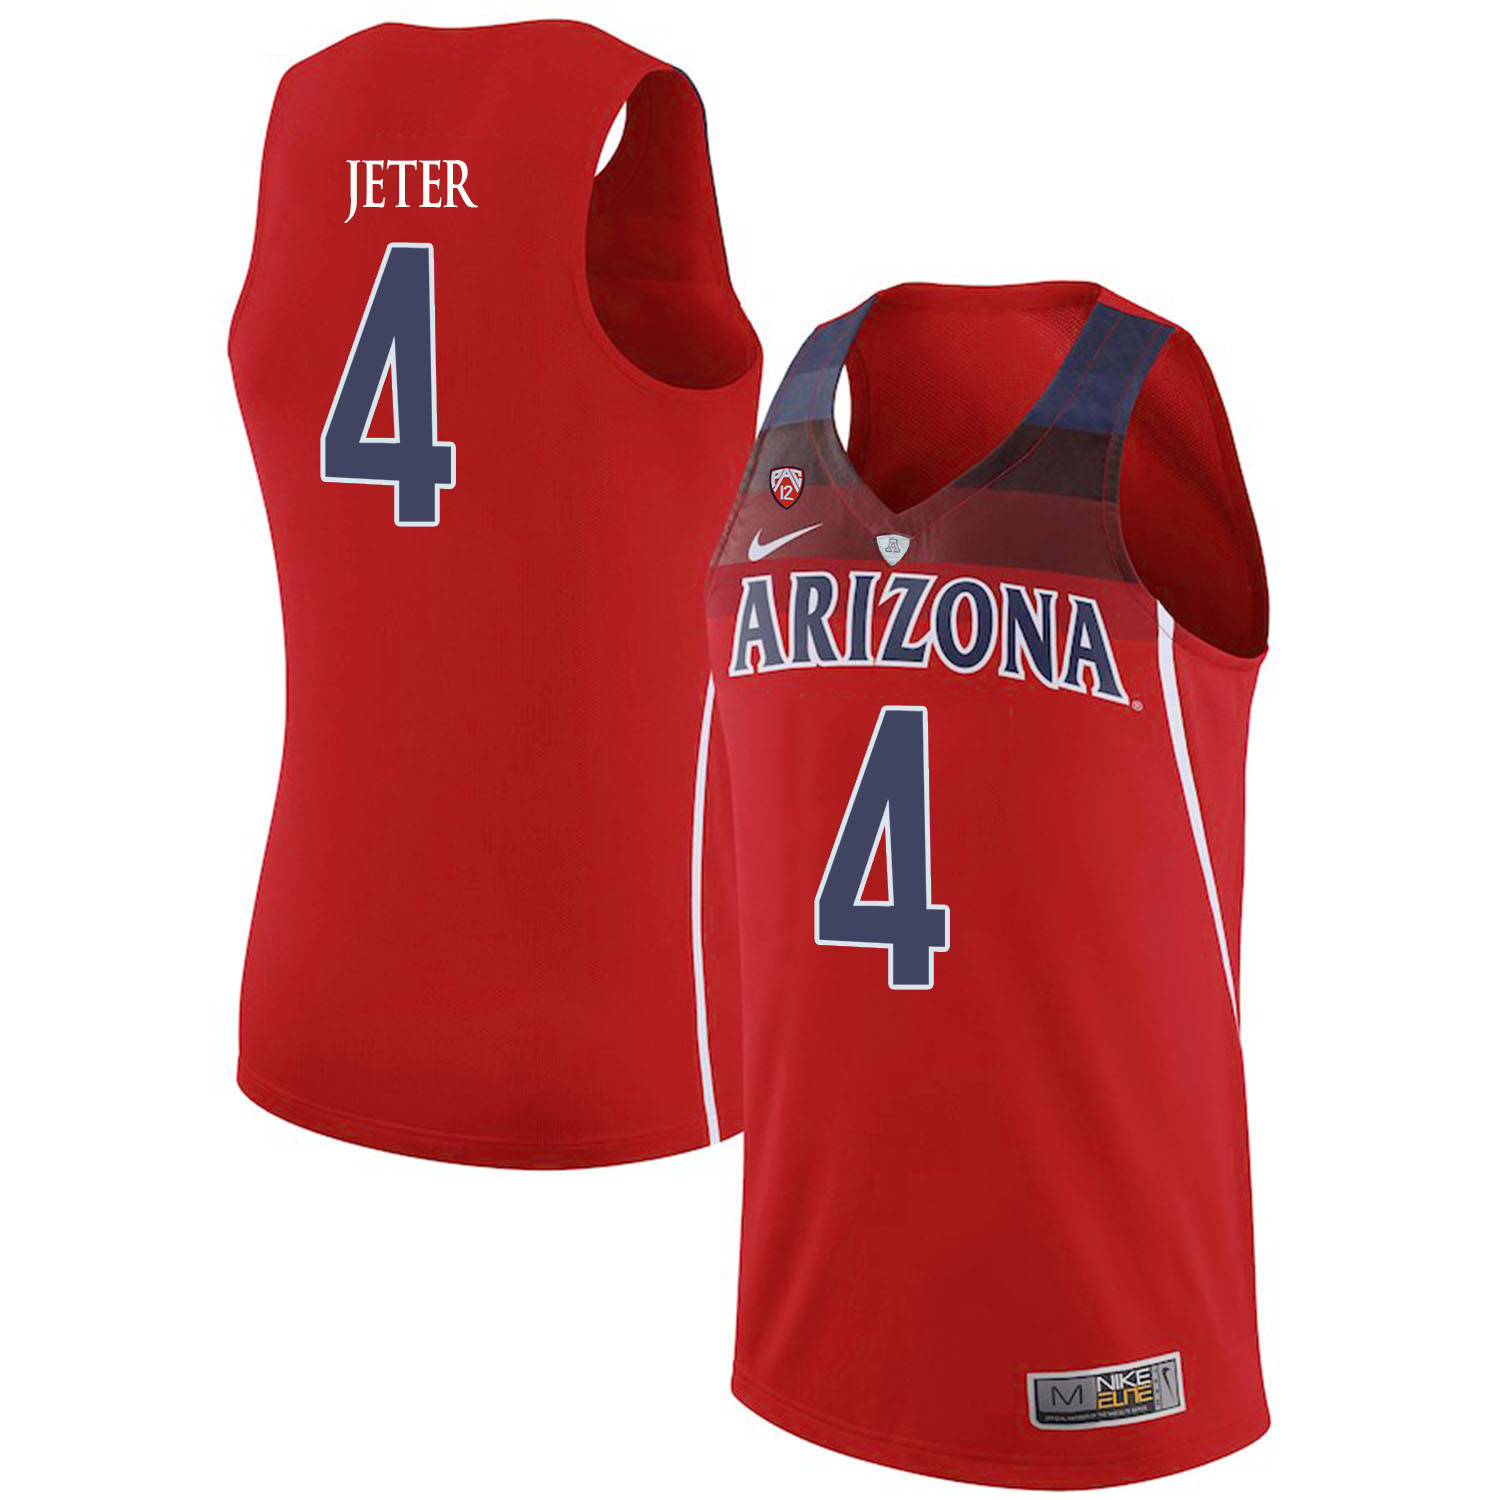 Arizona Wildcats 4 Chase Jeter Red College Basketball Jersey